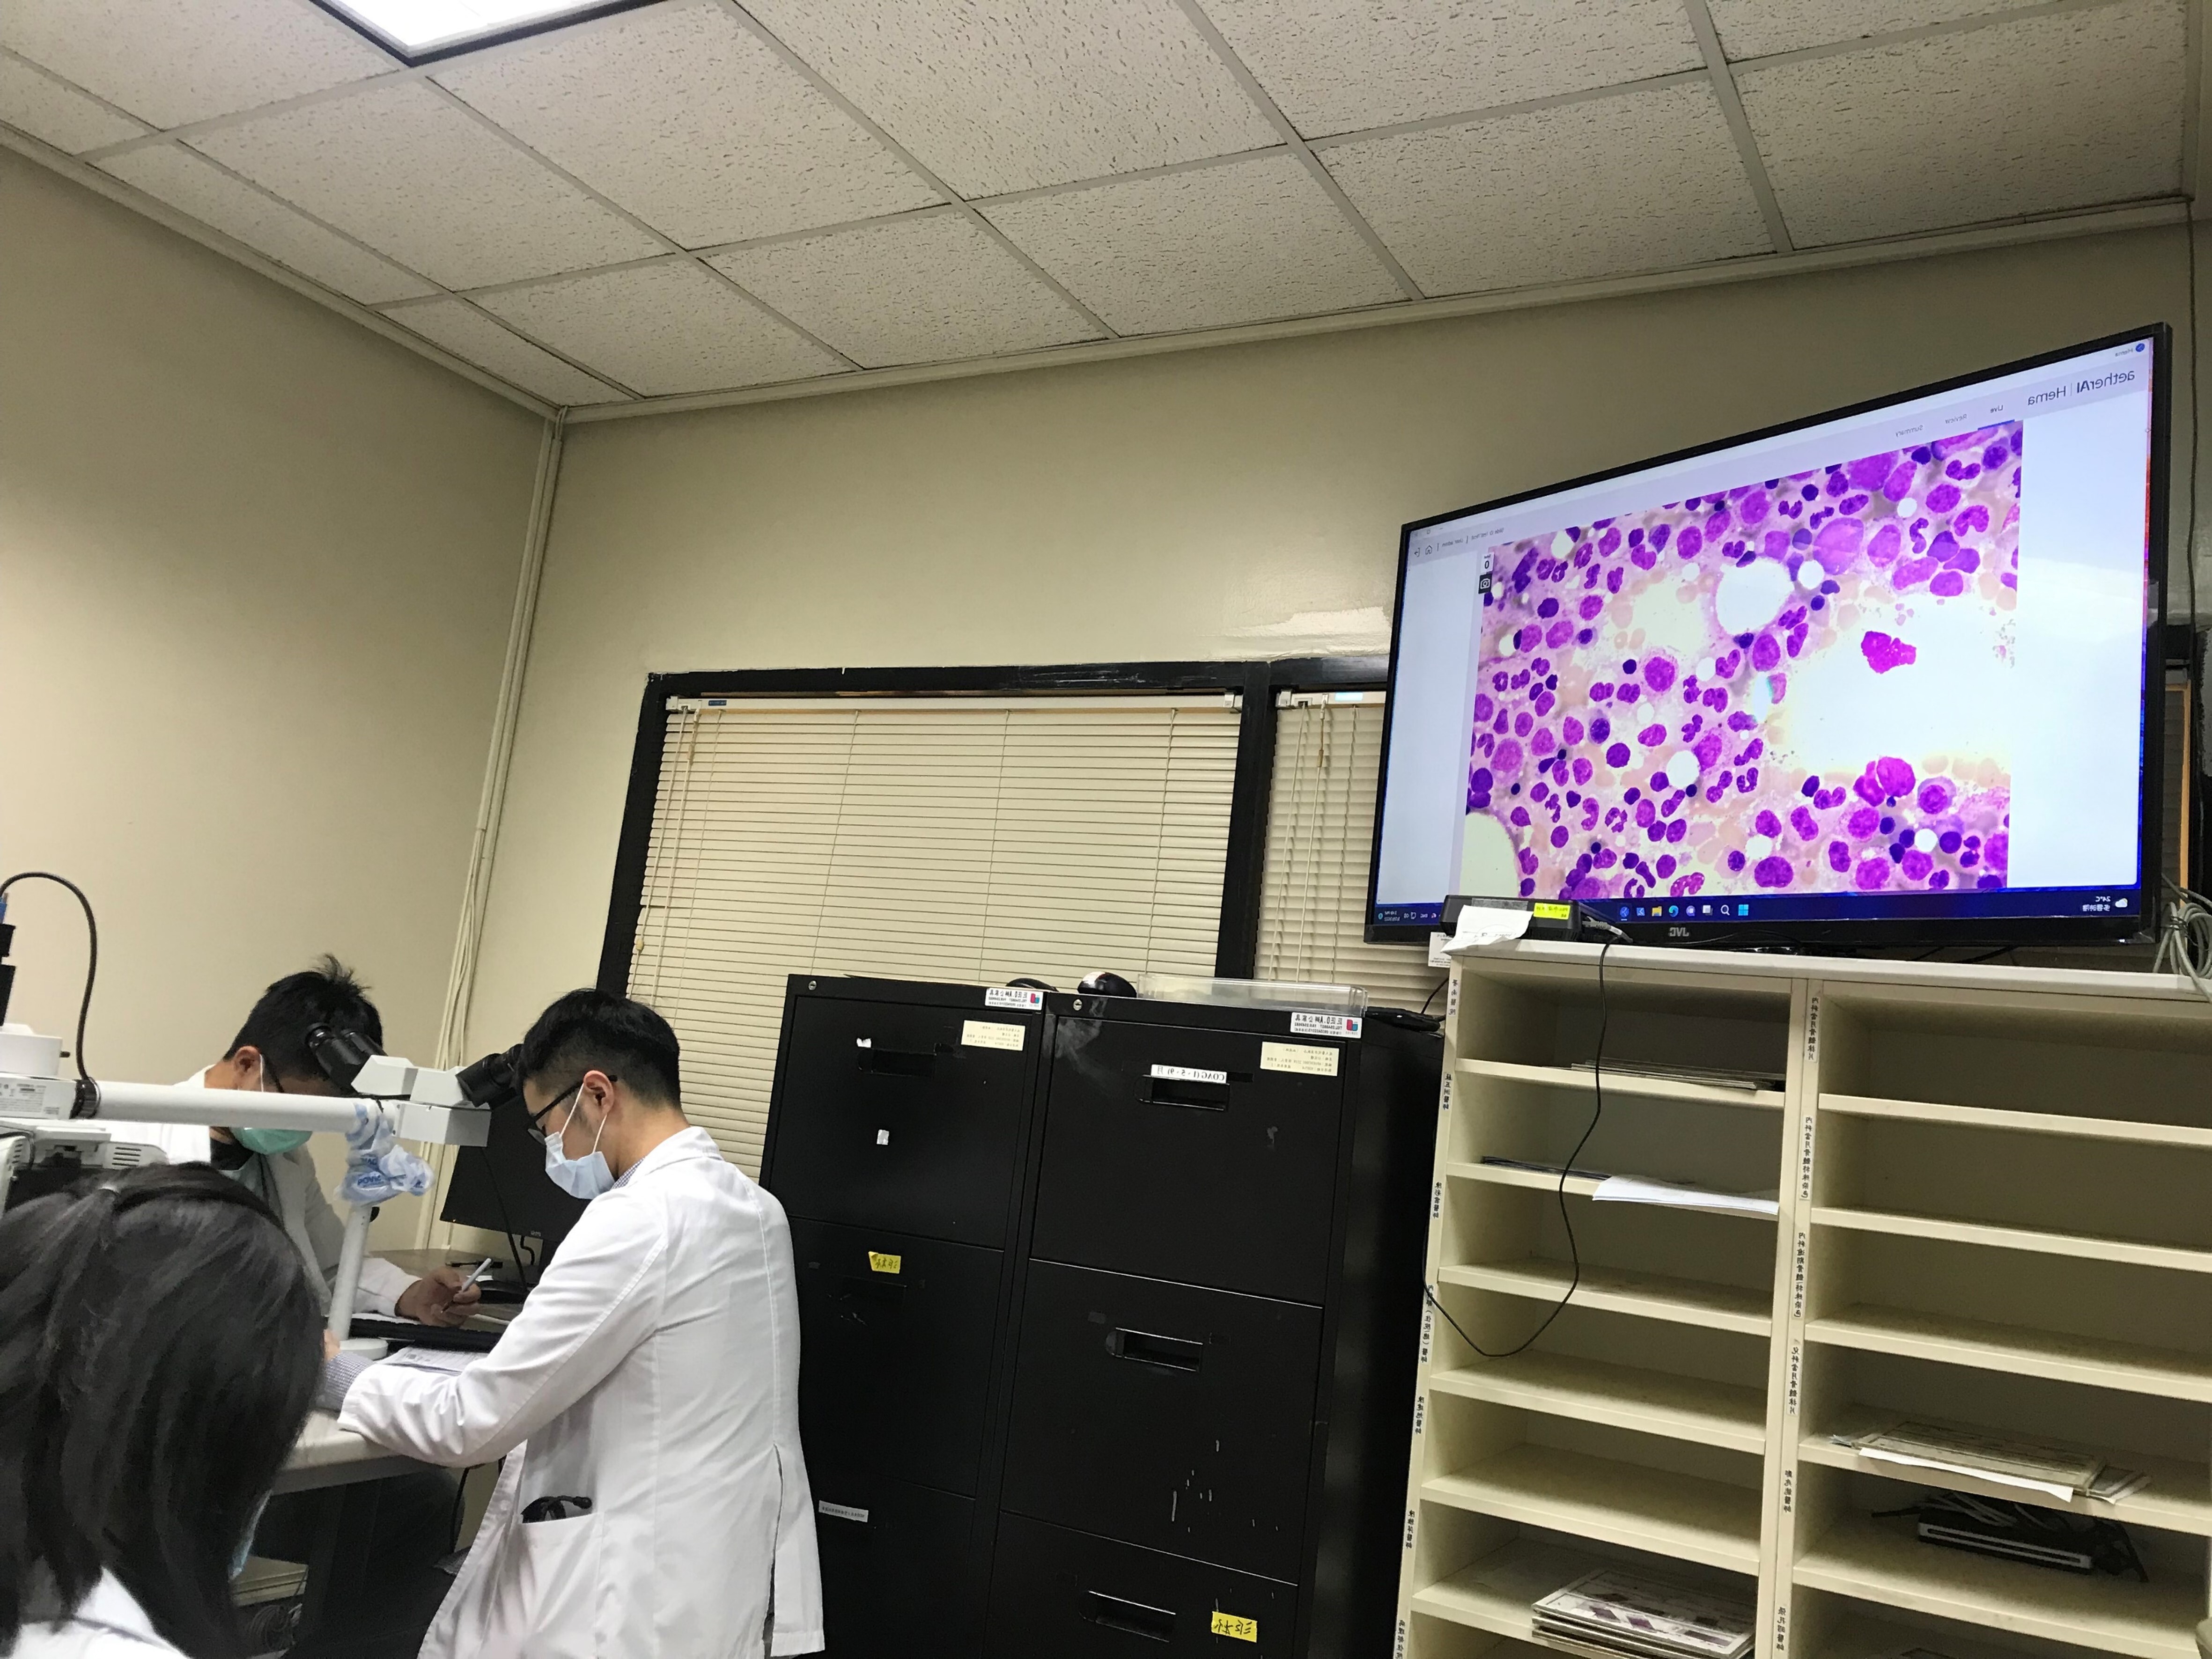 Figure 2. Students learning about the digital pathology system in class.